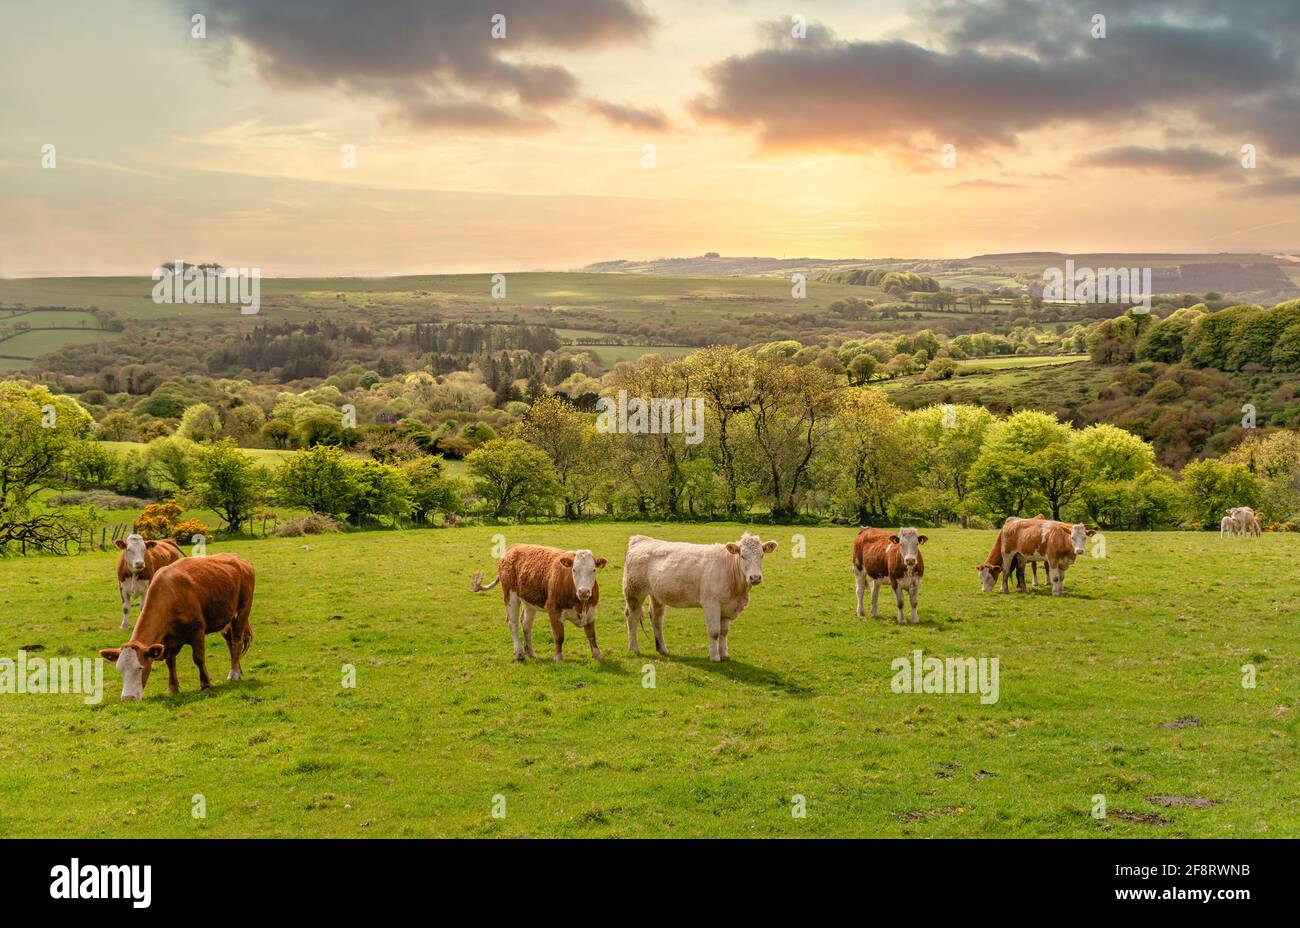 Cattle in a landscape at the Dartmoor National Park at dusk, Devon, England, UK Stock Photo